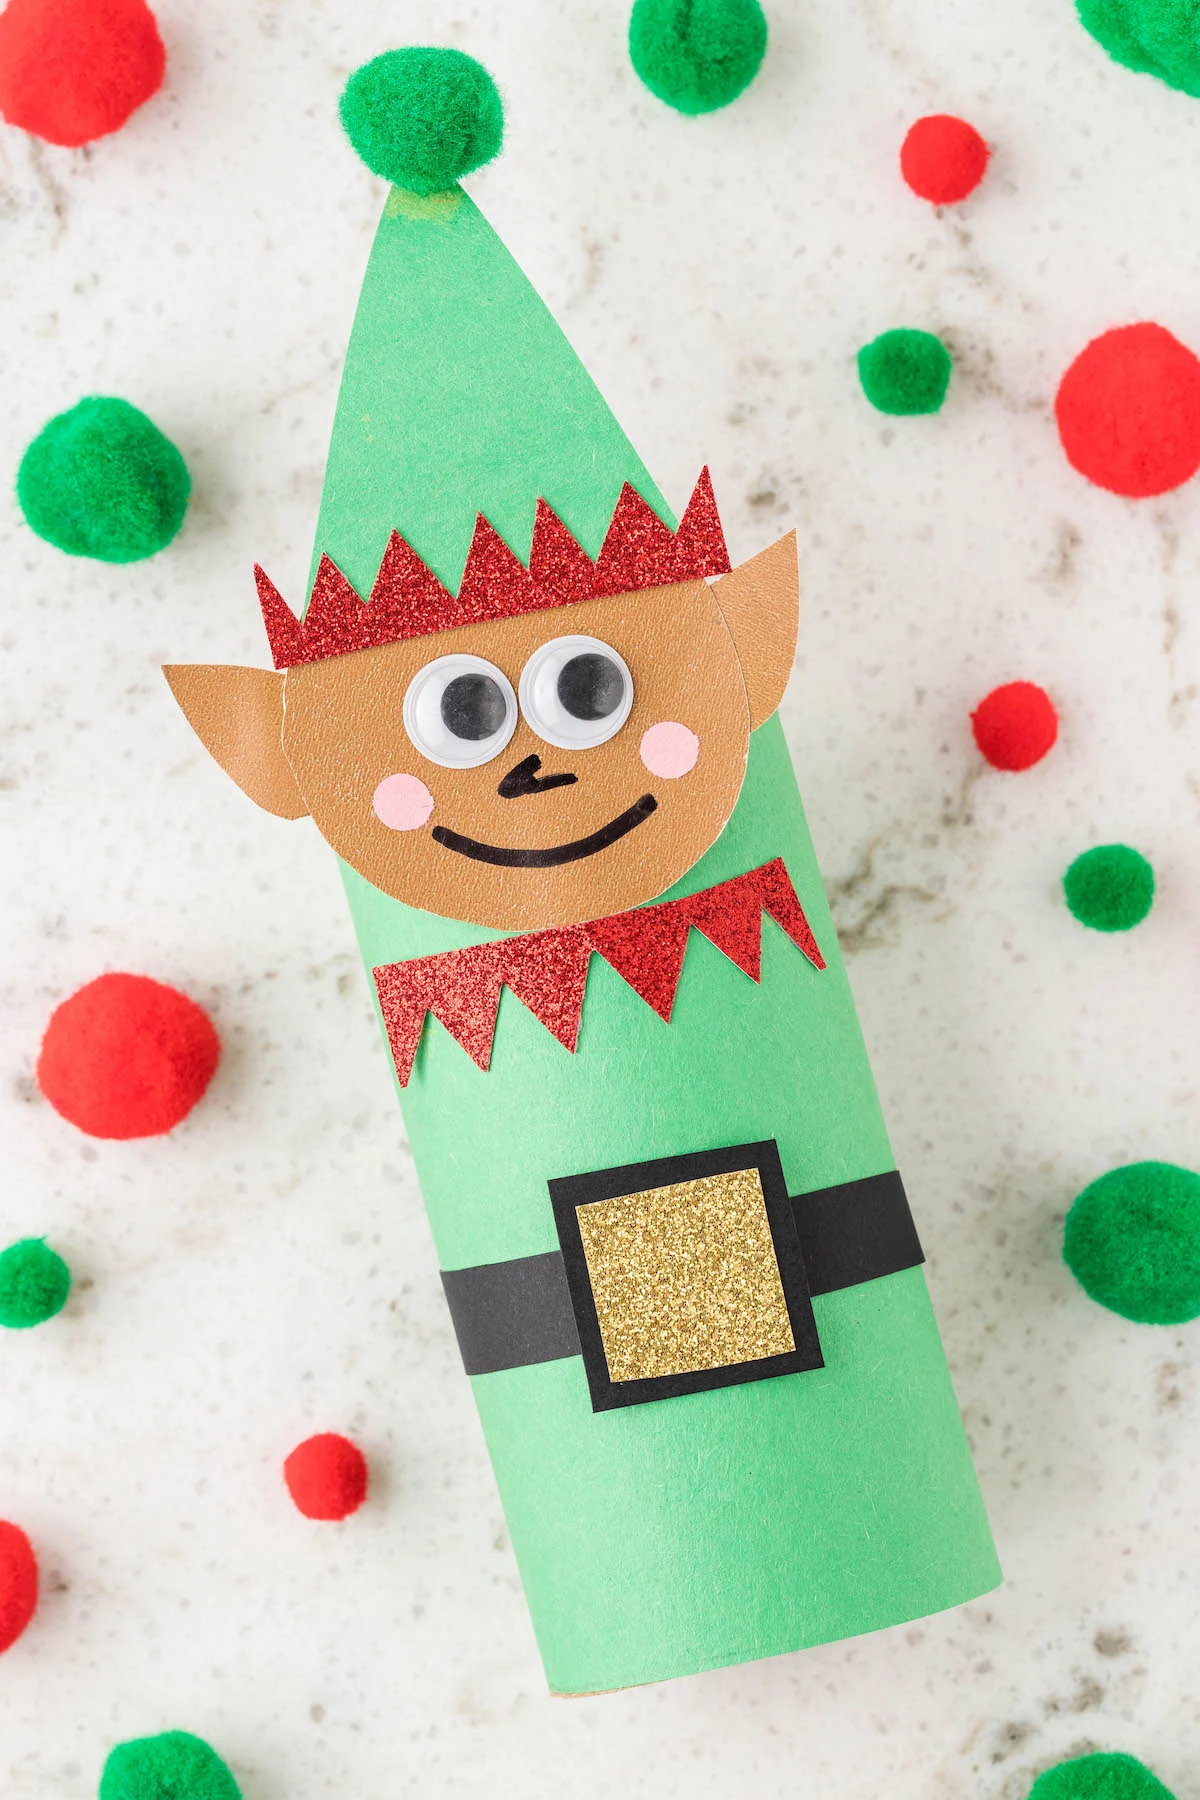 up close view of a crafted elf made of toilet paper roll and construction paper